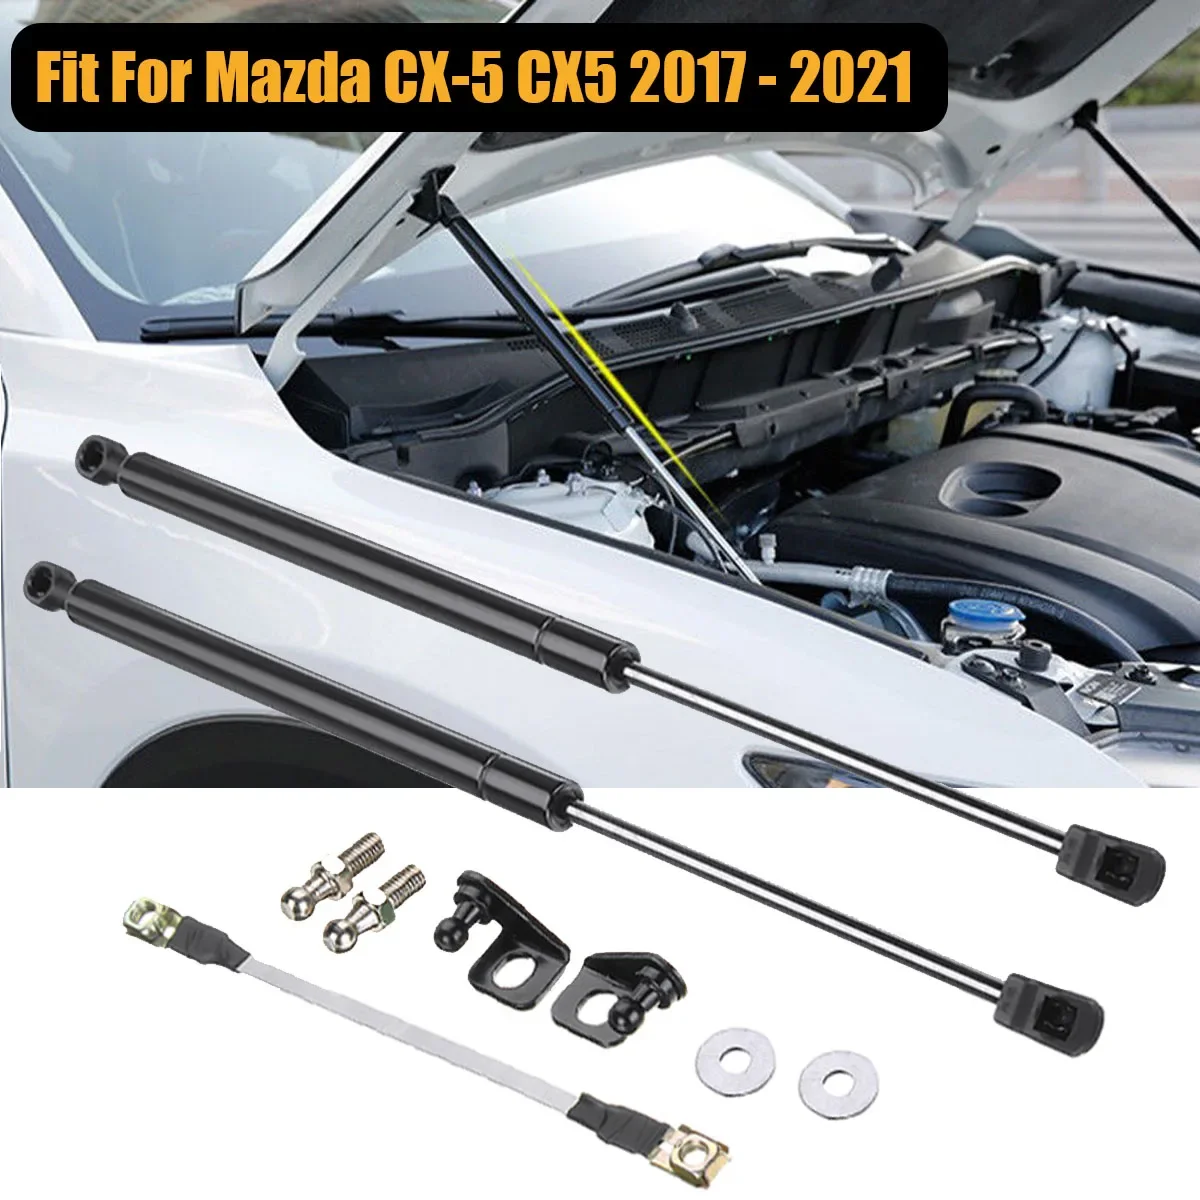 

For Mazda CX-5 CX5 2017 2018 2019 2020 2021 KF Front Engine Hood Gas Strut Spring Shock Bar Lift Support Rod Car Accessories